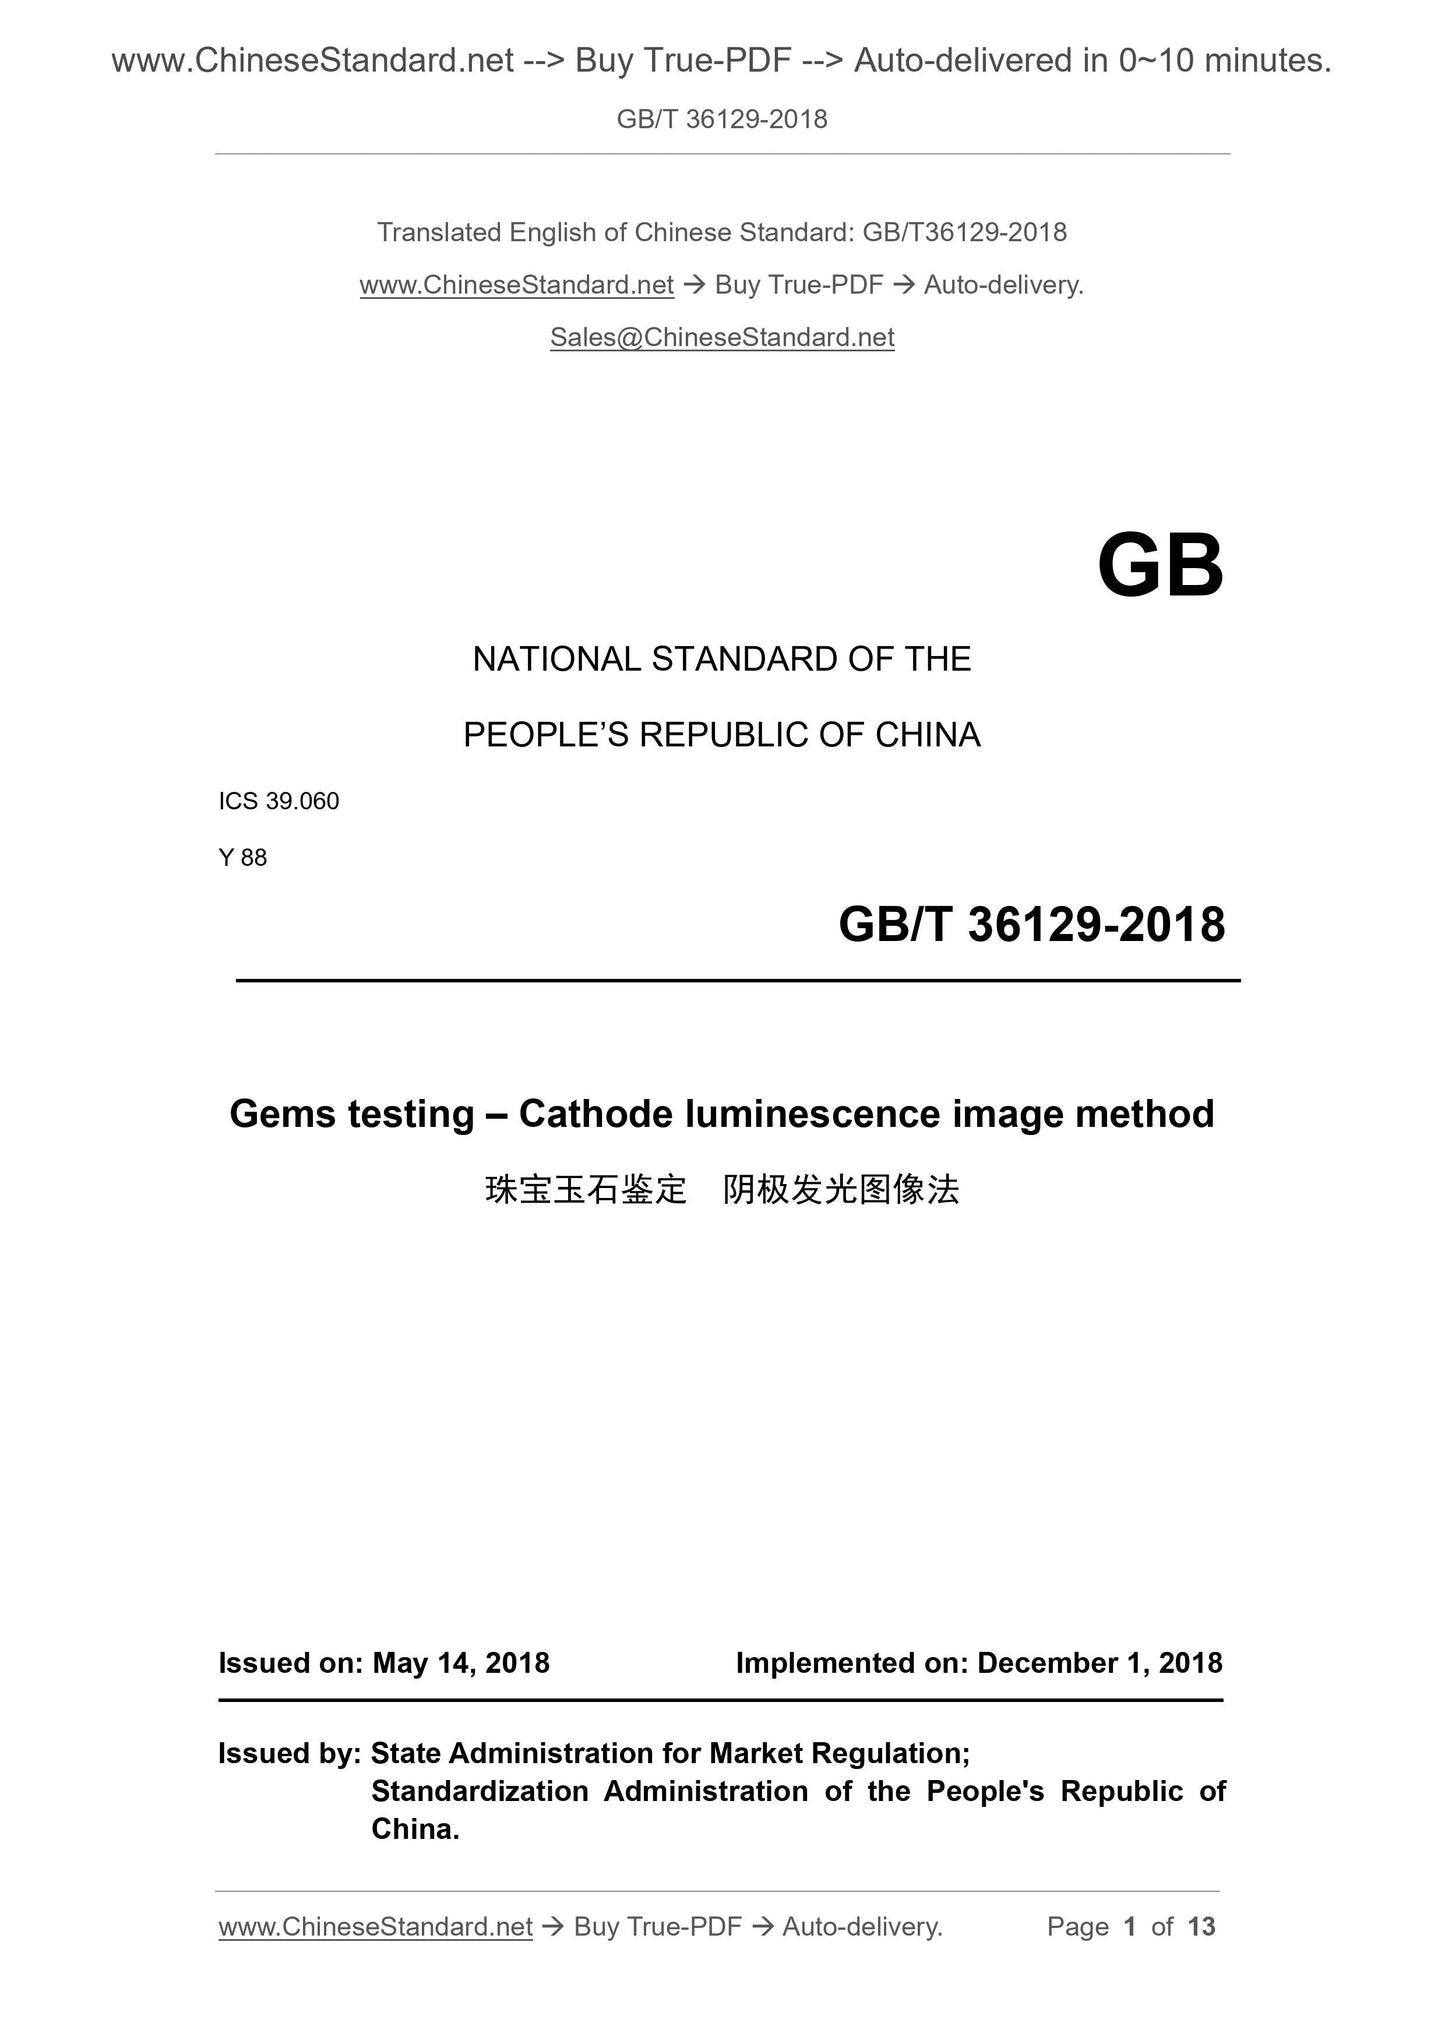 GB/T 36129-2018 Page 1